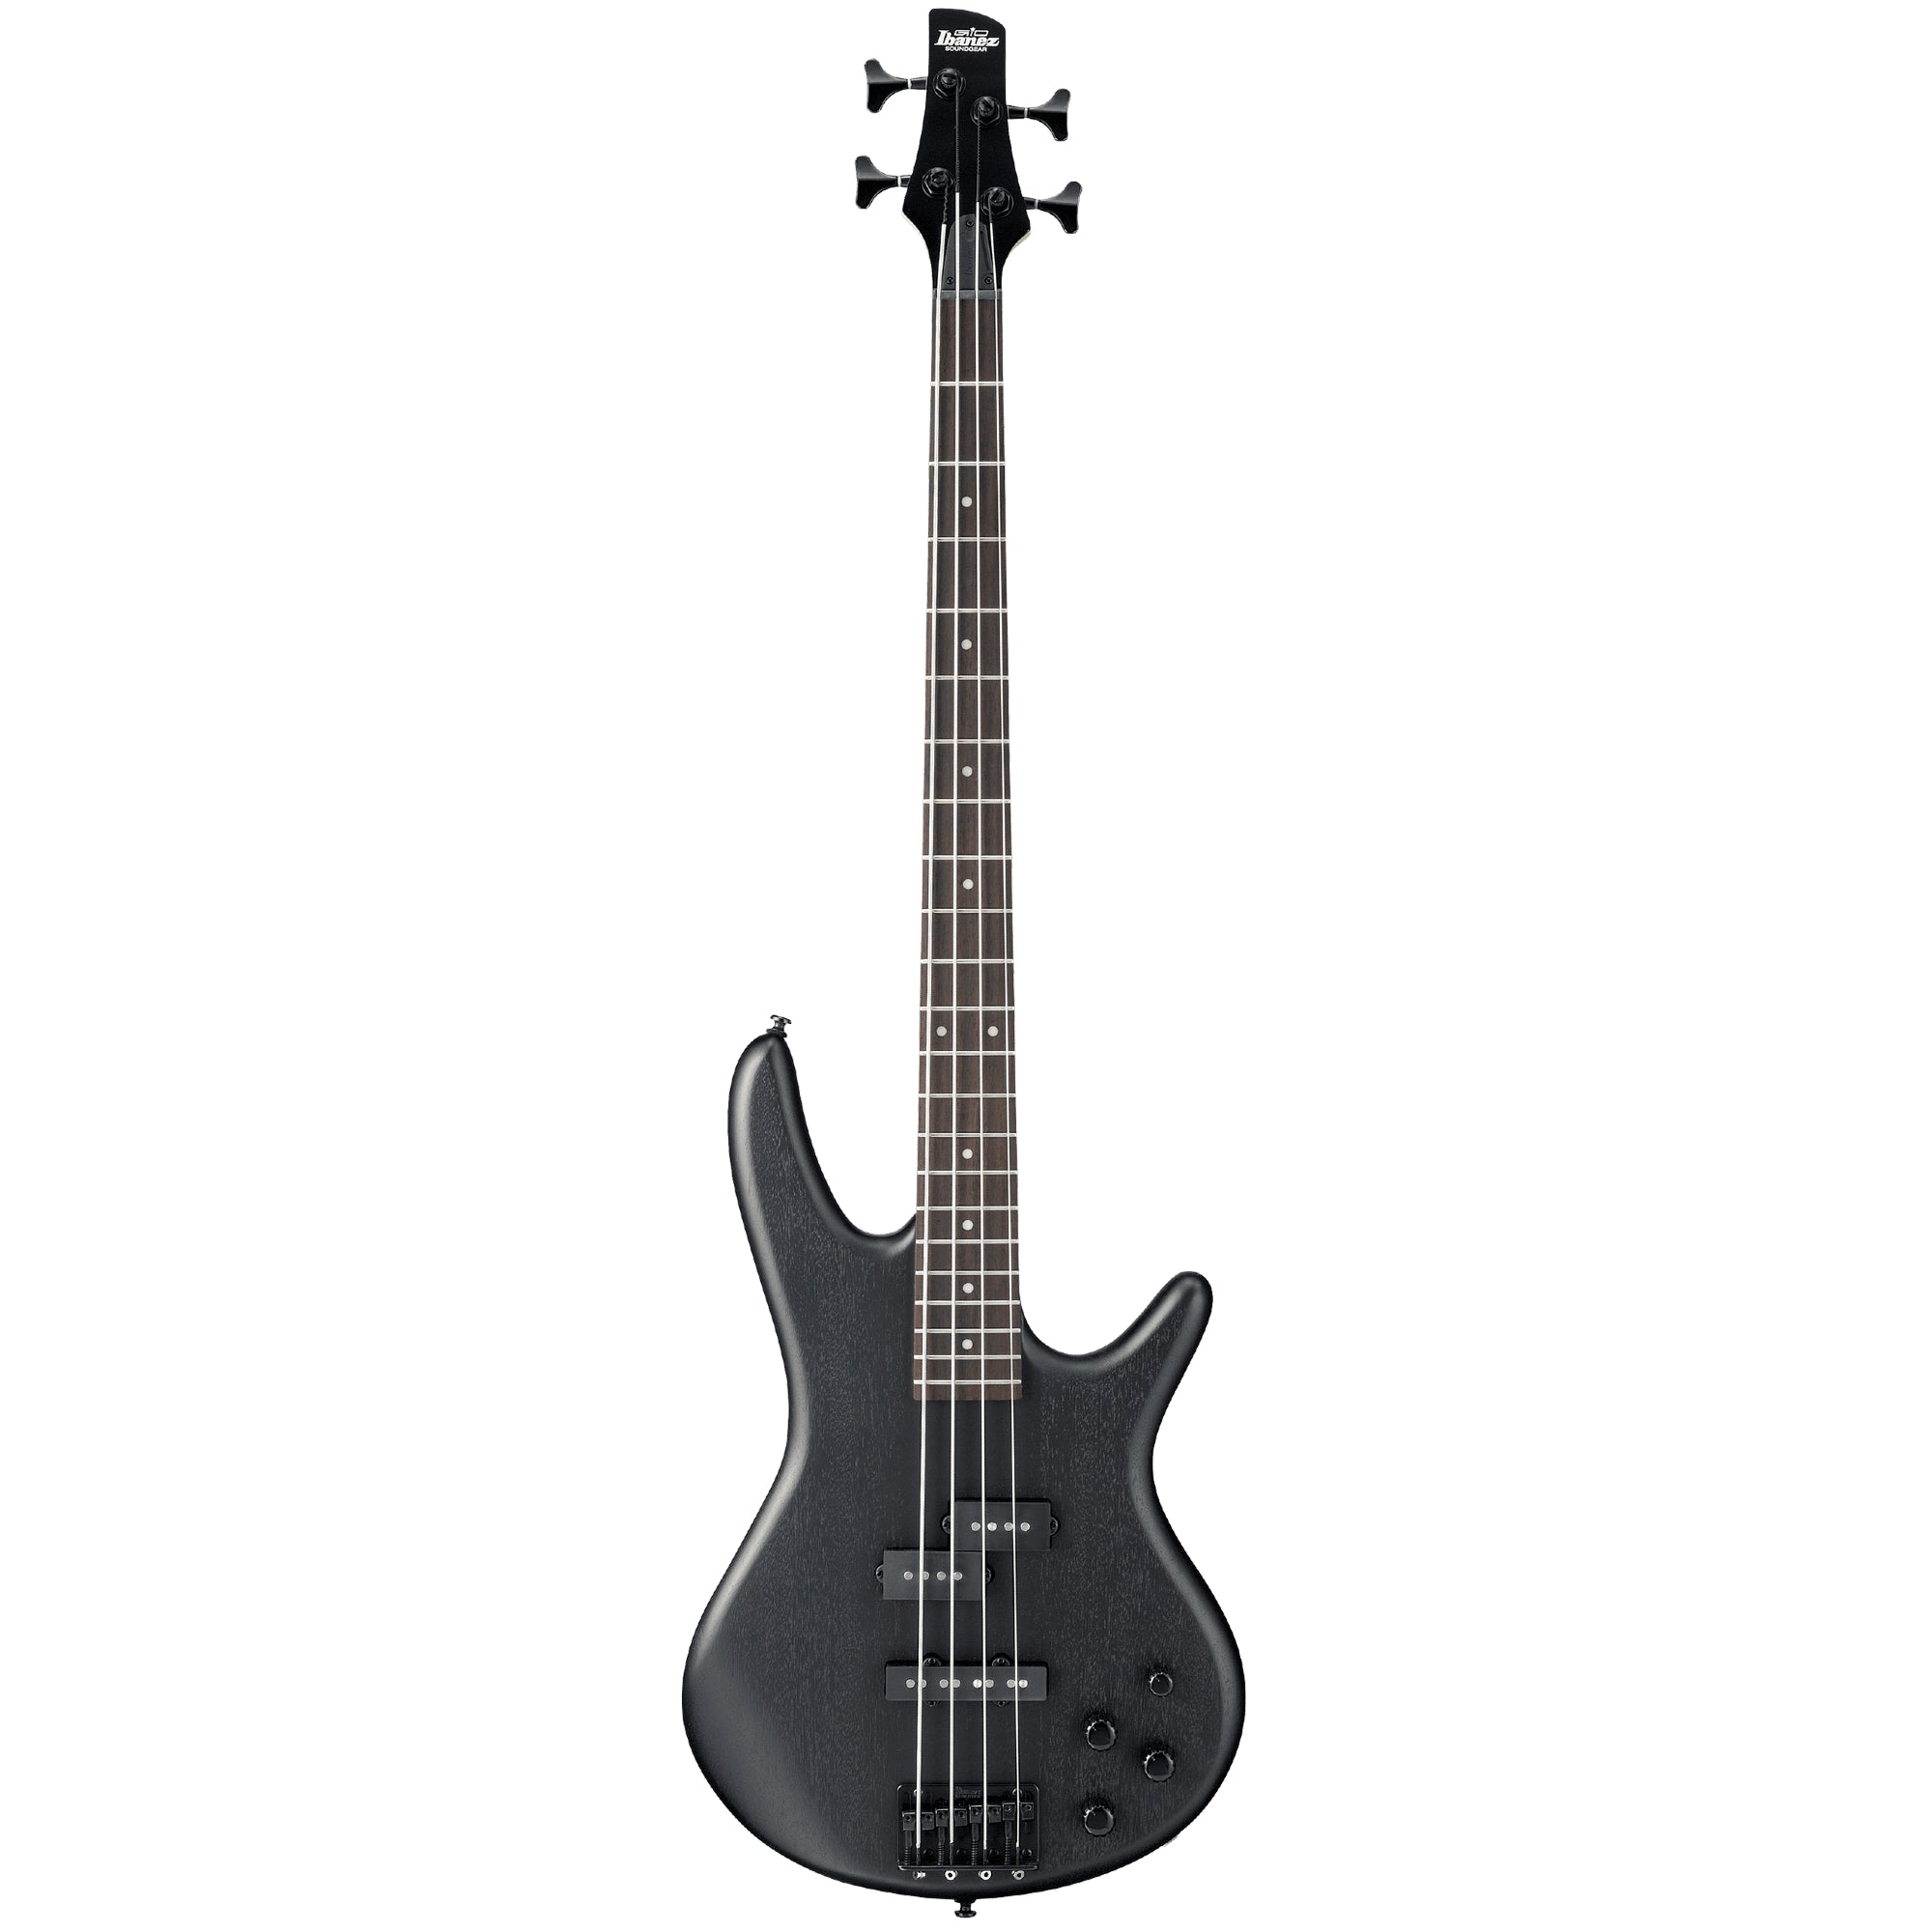 Ibanez GSR200BWK Gio 4-String Electric Bass - Weathered Black